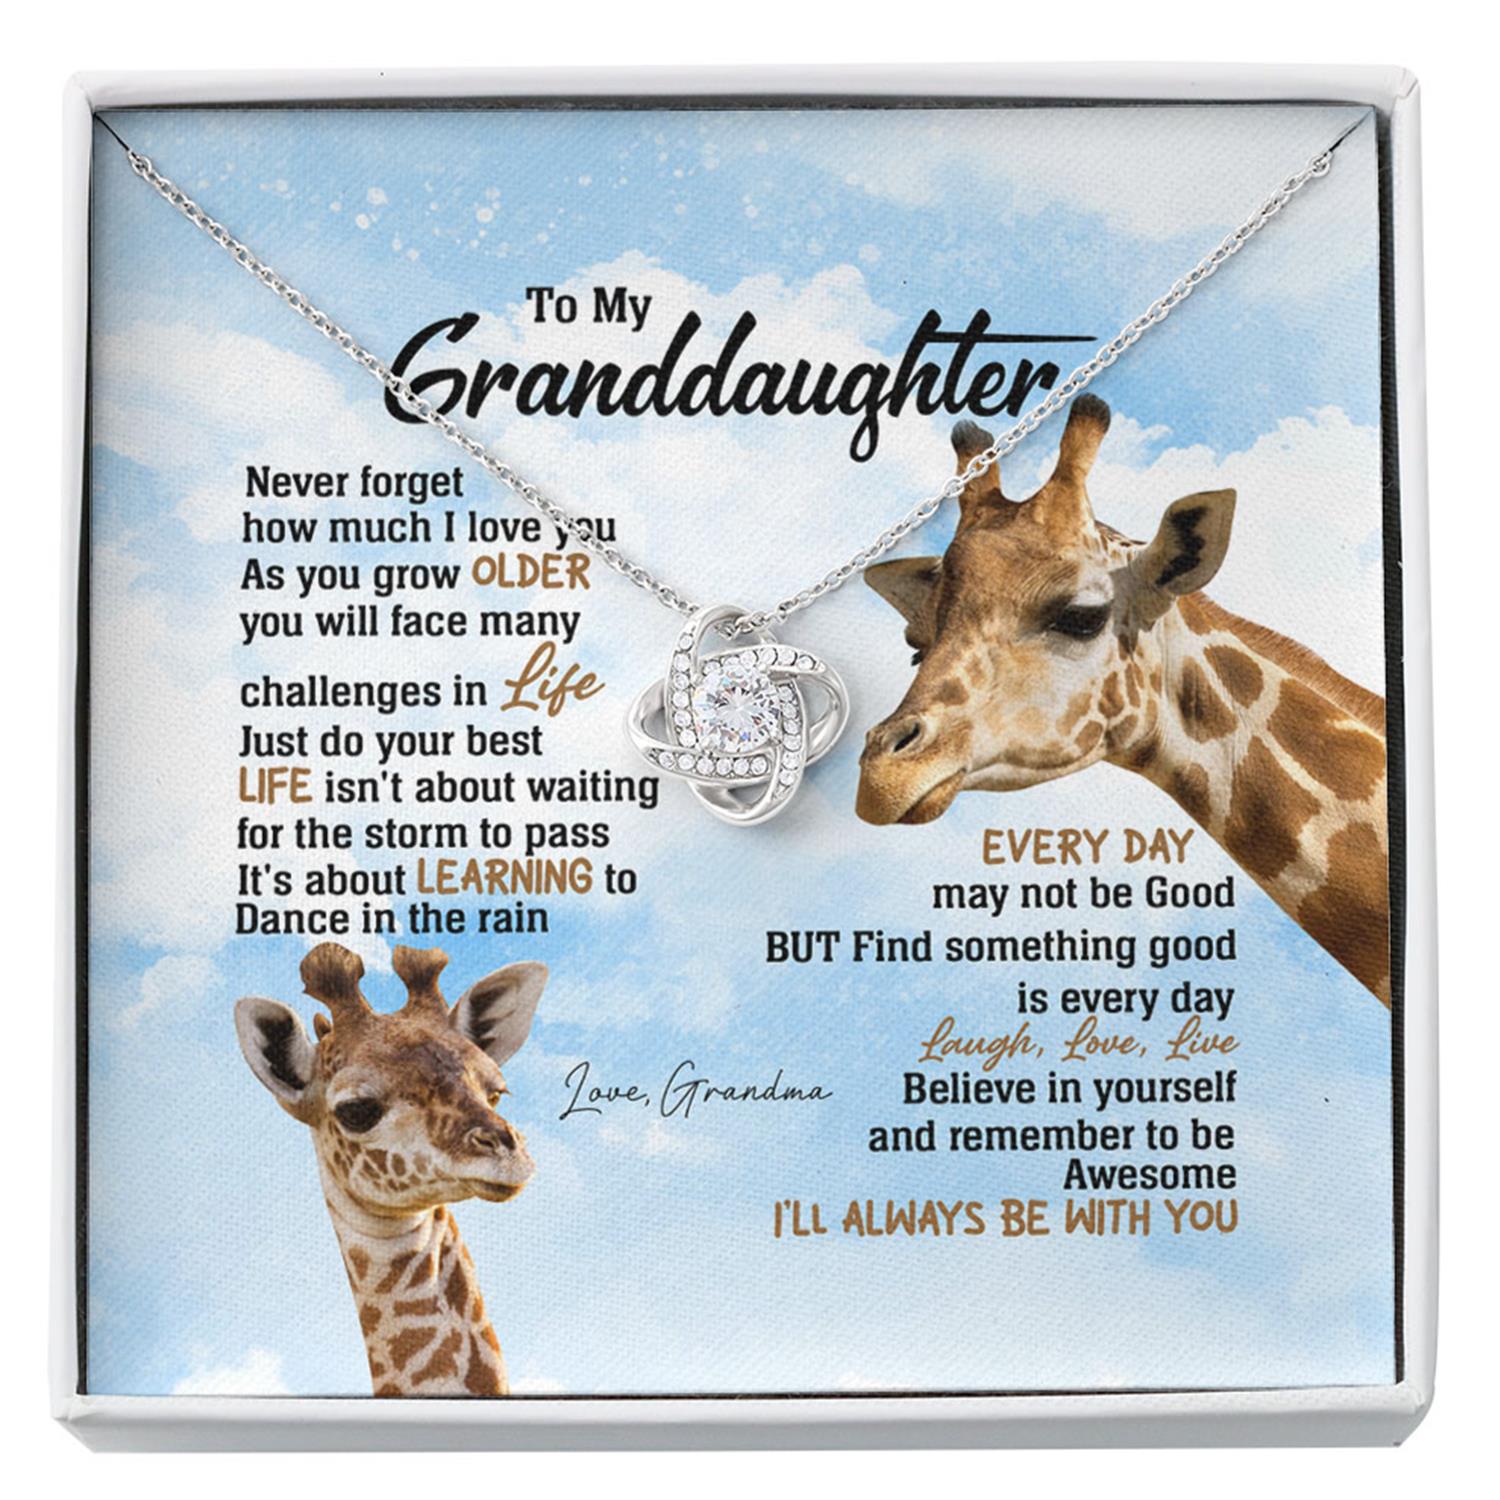 Granddaughter Necklace, To My Granddaughter Necklace - Dance In The Rain - Gift From Grandma Giraffe Custom Necklace